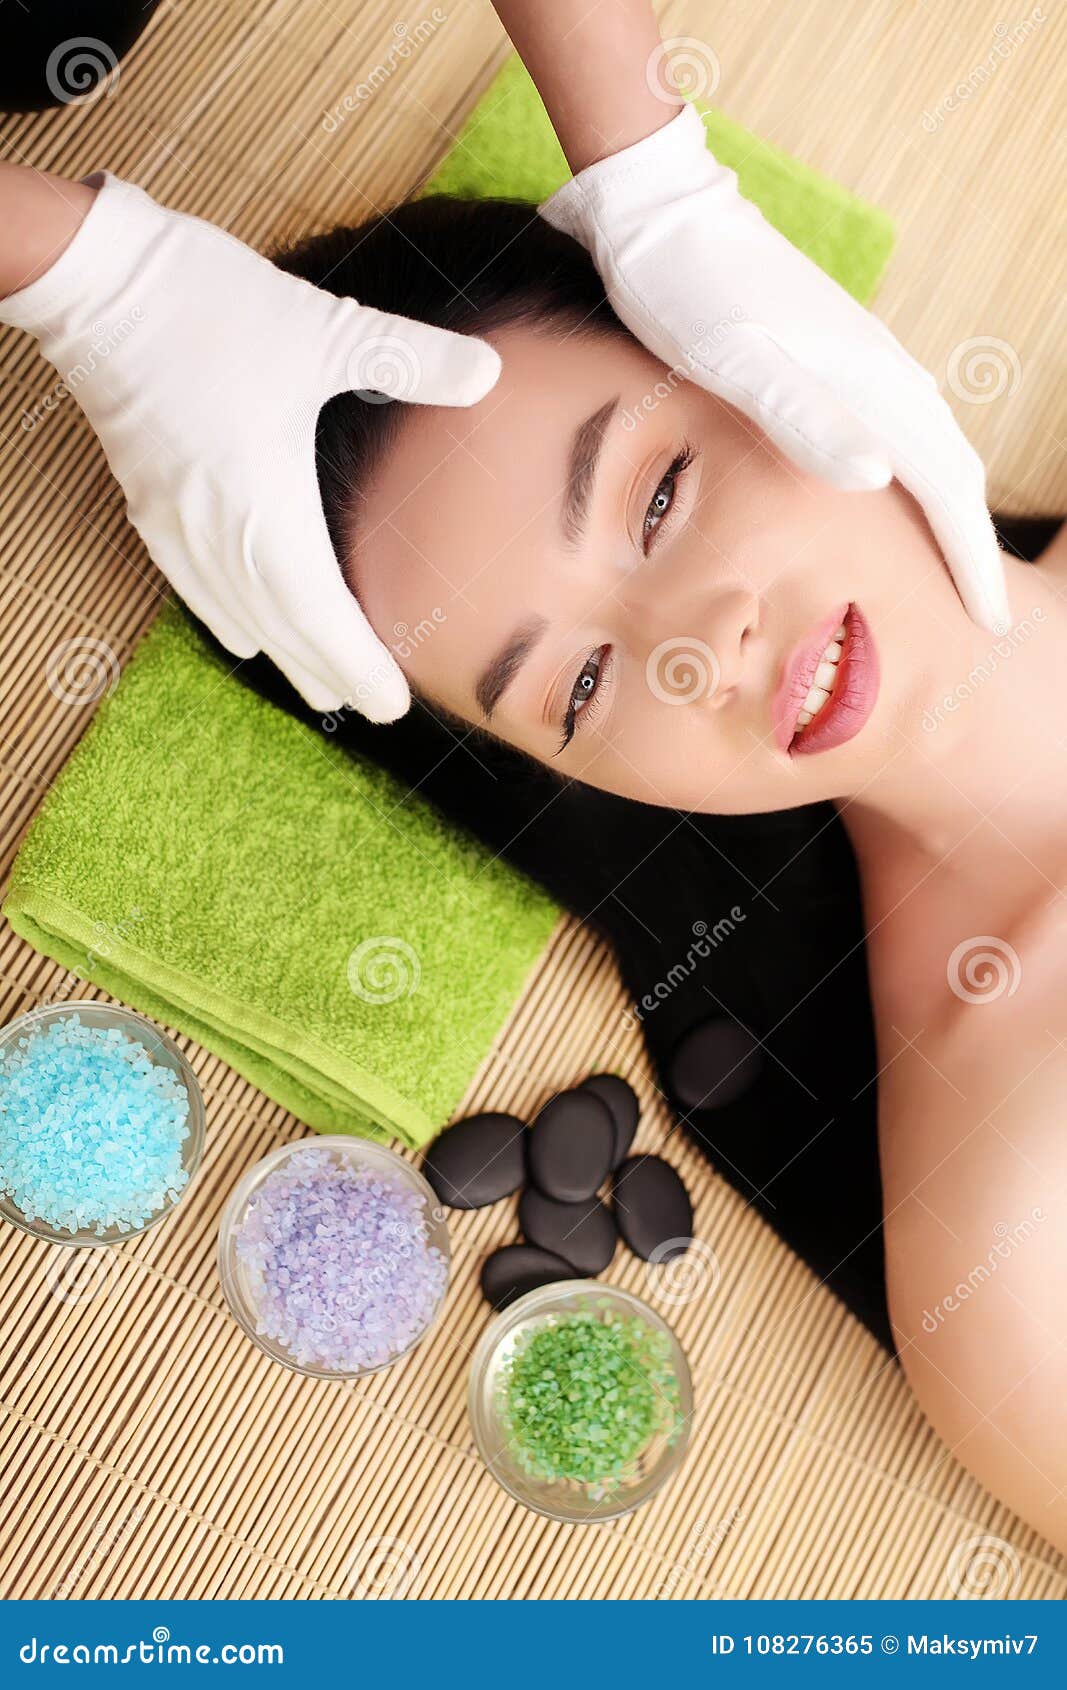 Woman Under Professional Facial Massage In Beauty Spa Stock Image